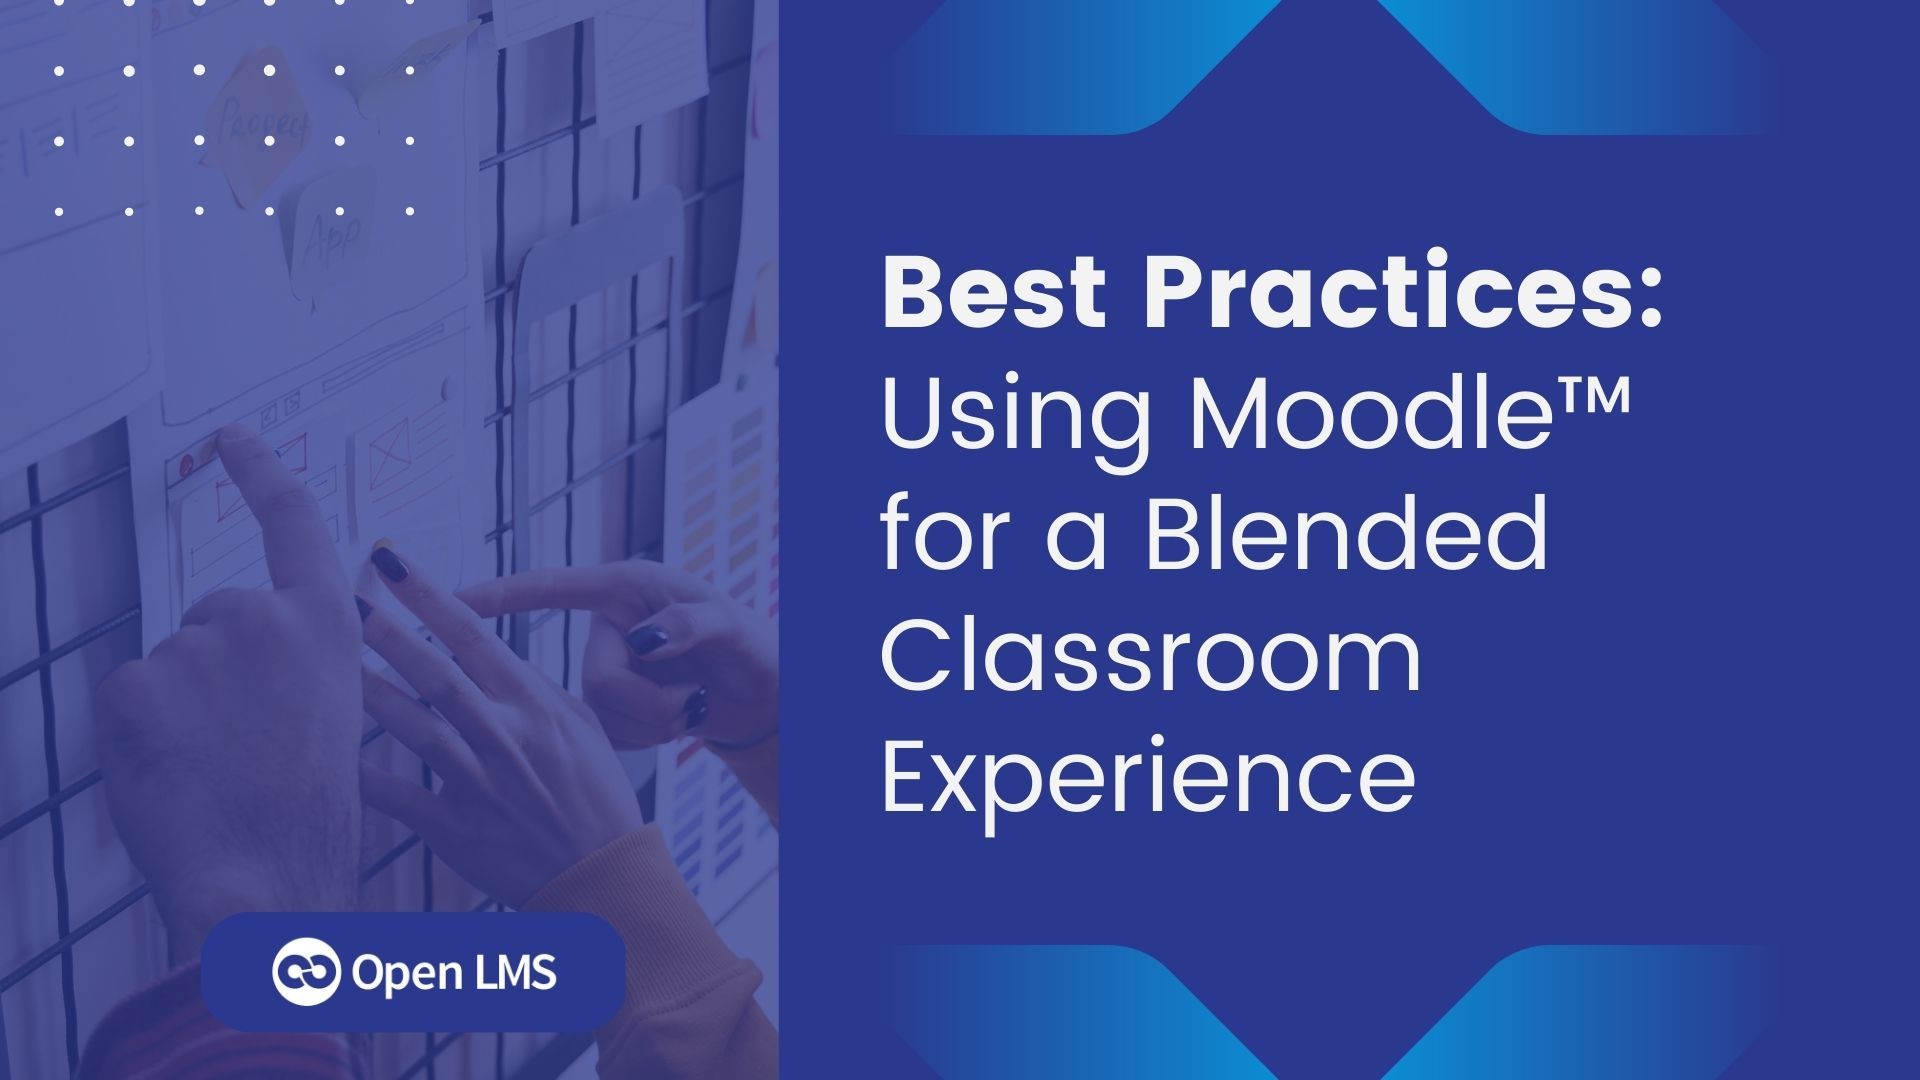 Best practices: Using Moodle™ for a blended classroom experience